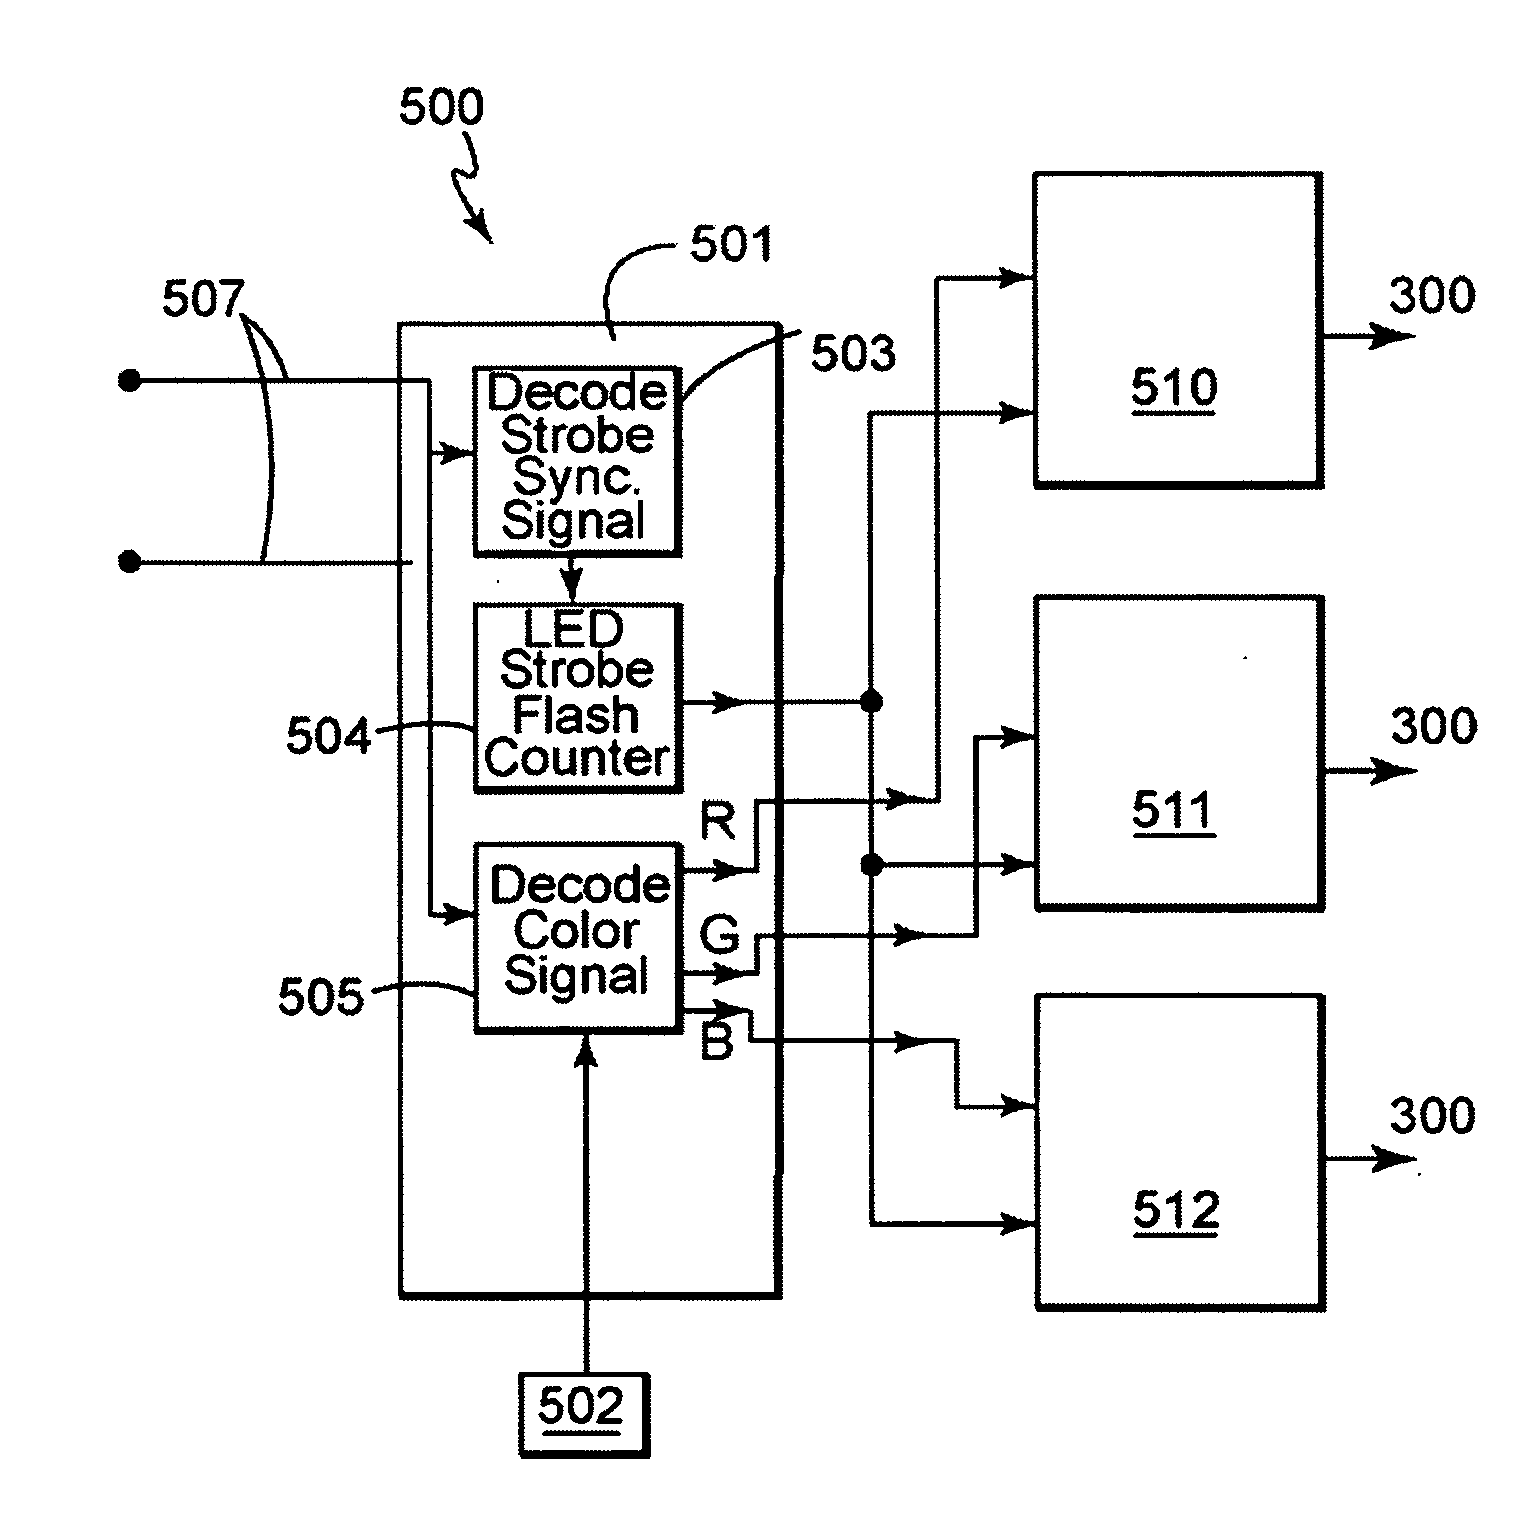 System and methods for providing mass notification using existing fire system